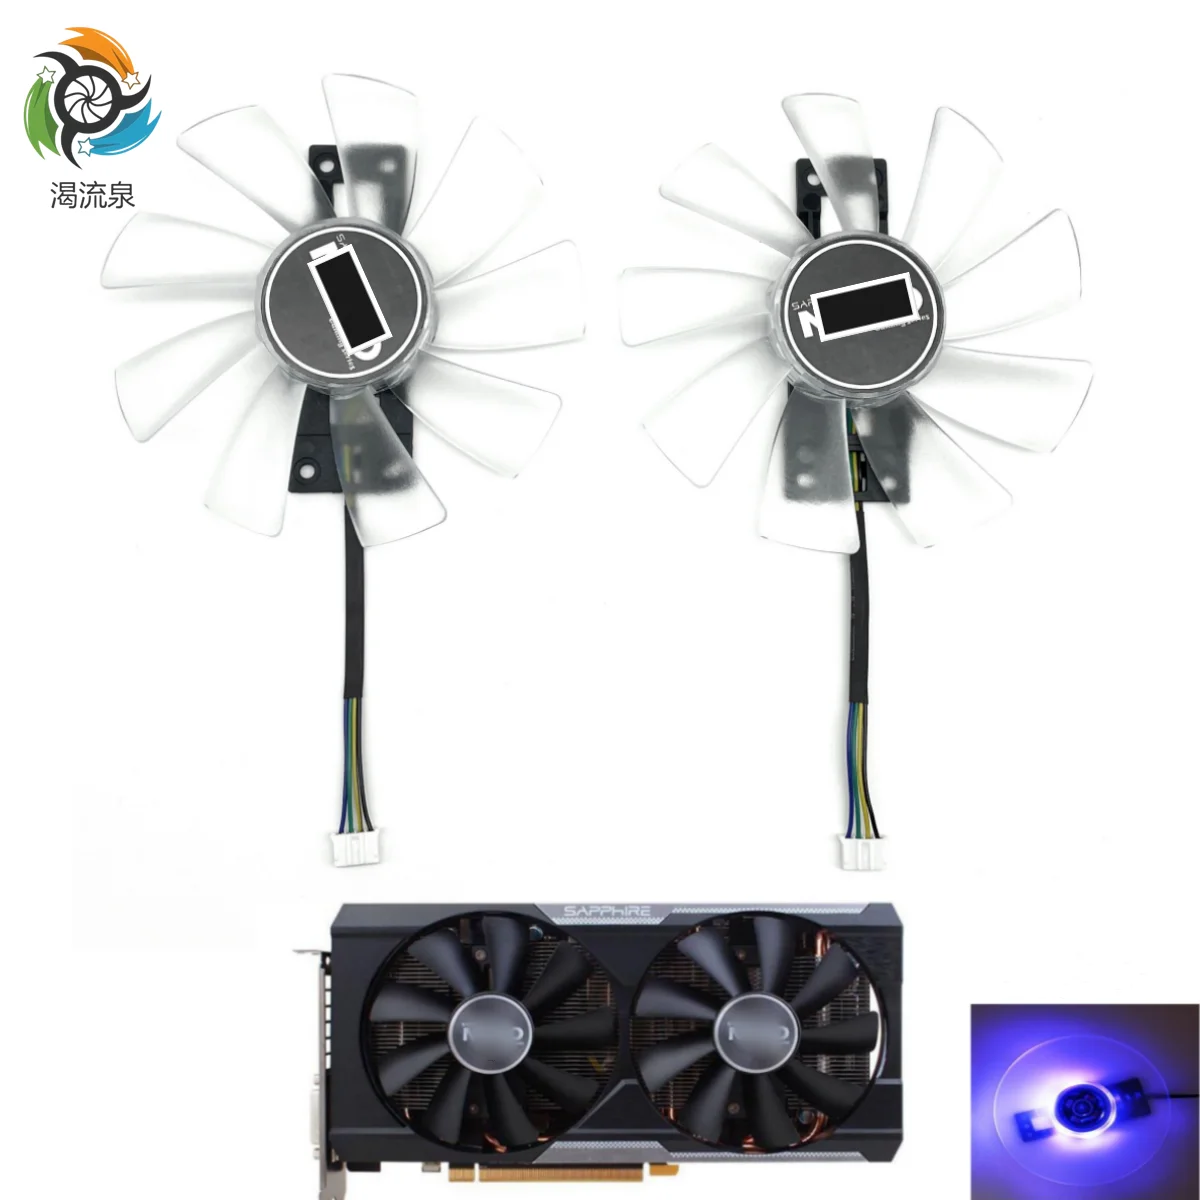 

New 100mm GAA8S2U Cooling White Fan With Blue Light For Sapphire R9 380 380X Graphics Card Cooler Fan